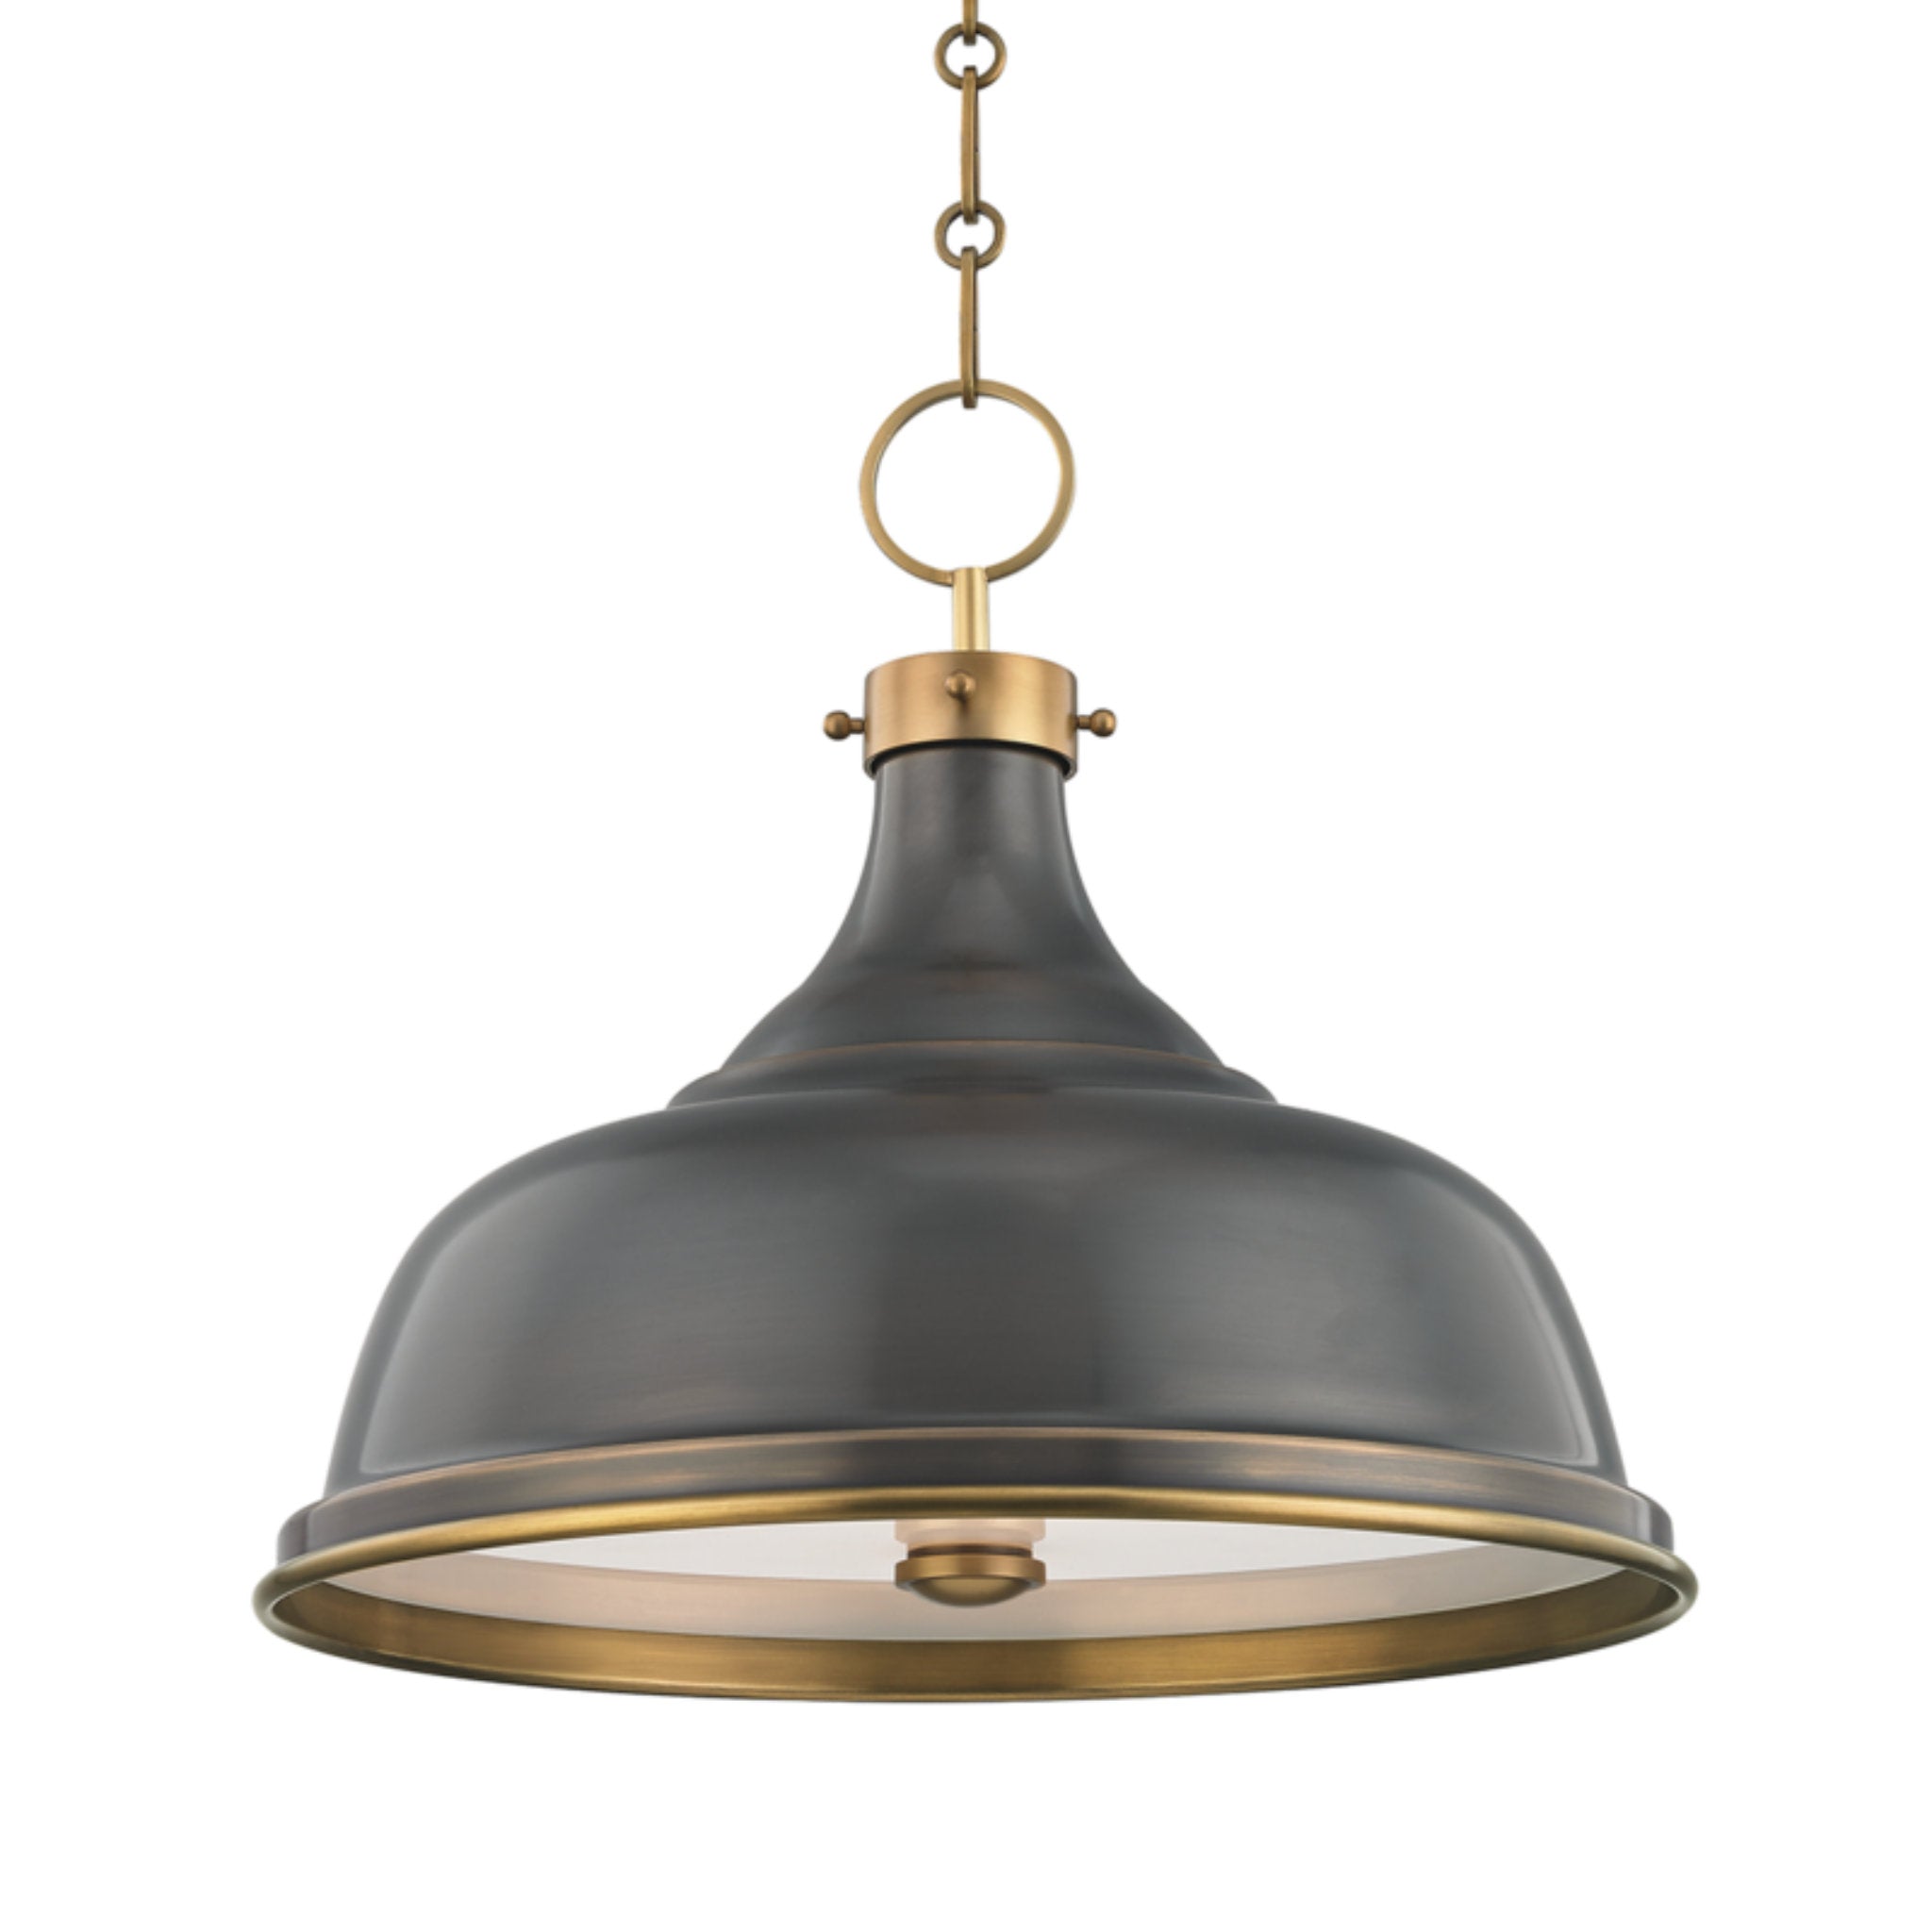 Metal No.1 3 Light Pendant in Aged/antique Distressed Bronze by Mark D. Sikes